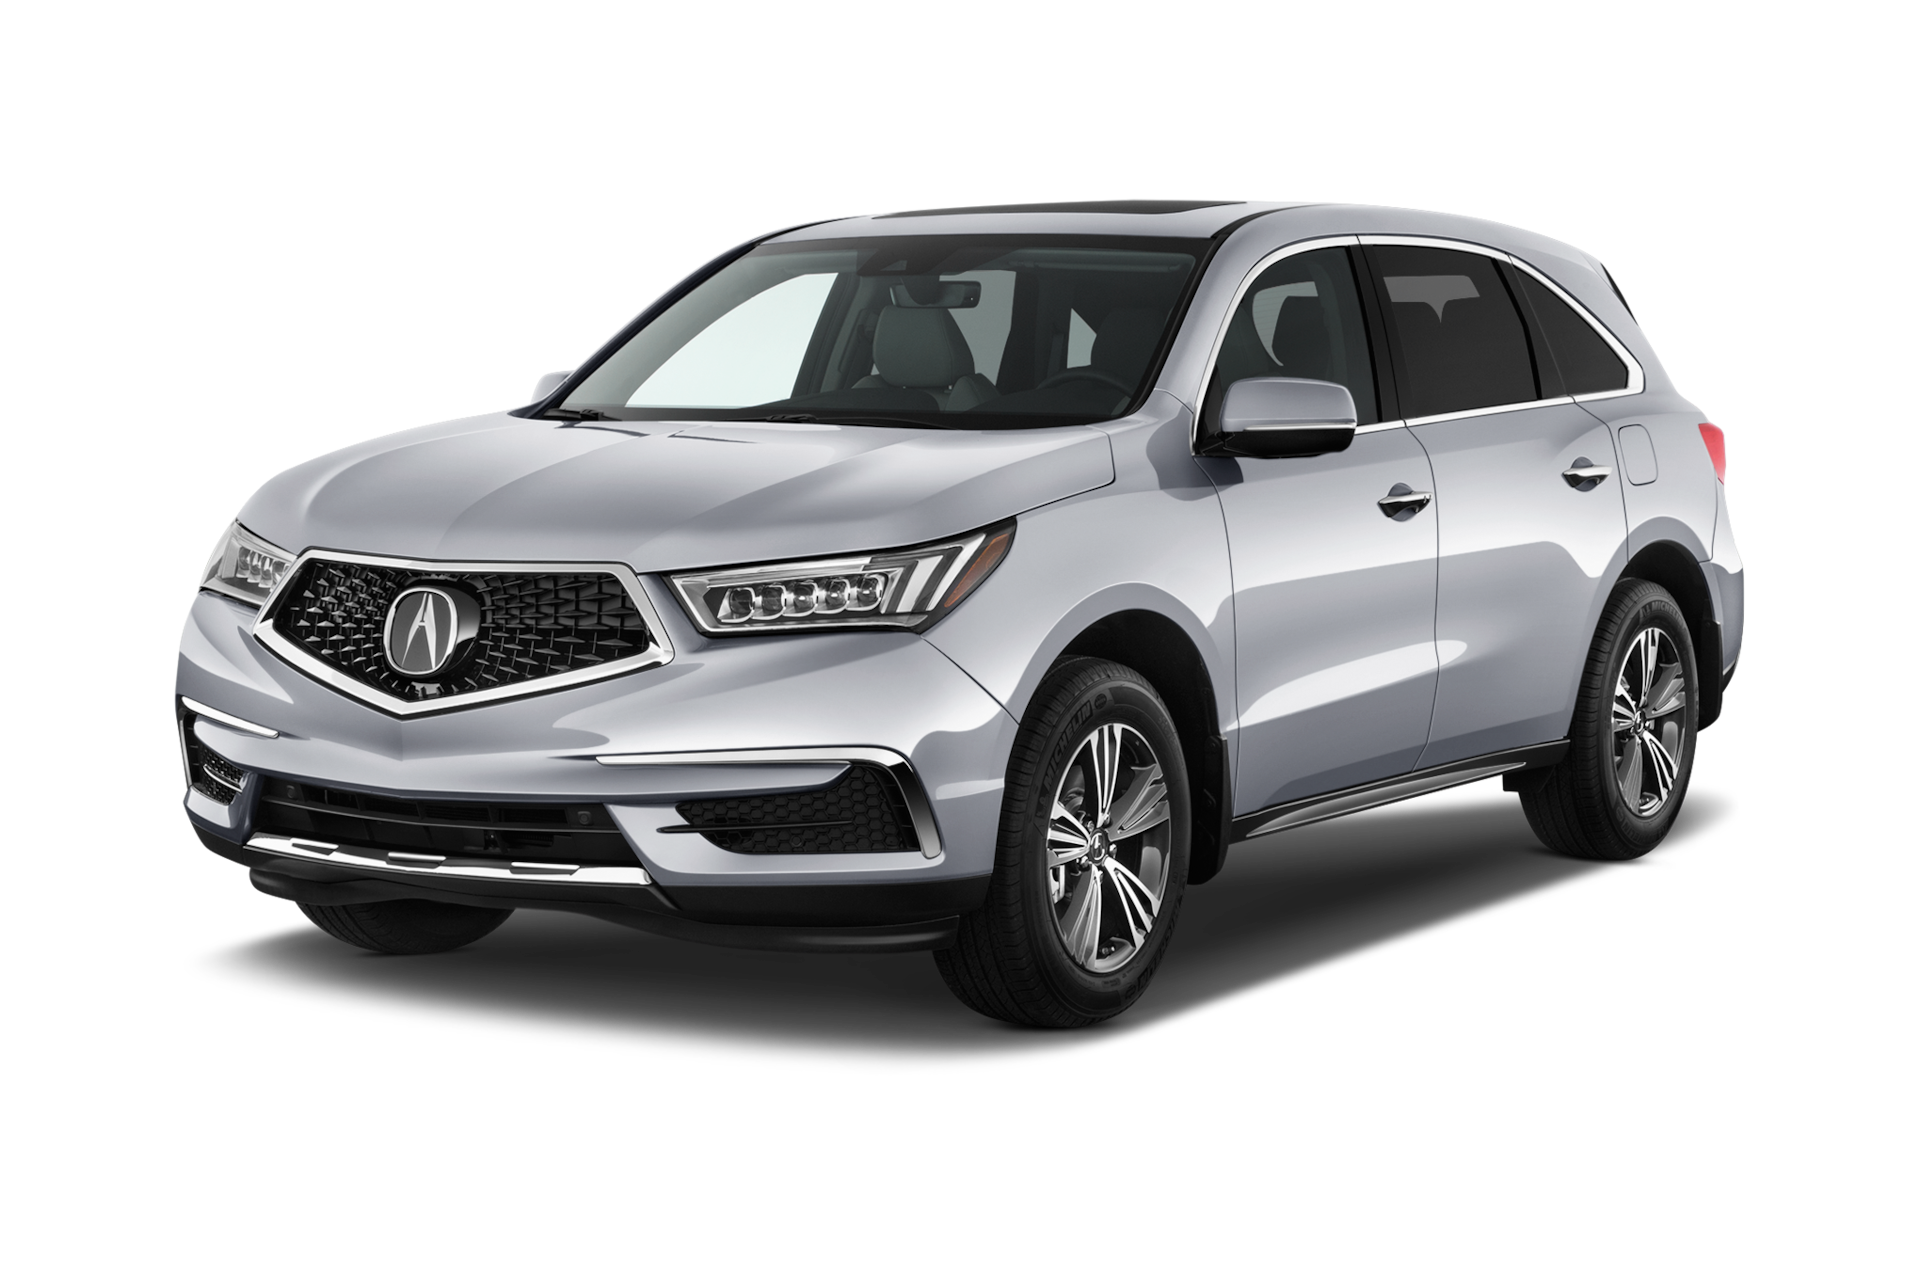 2019 Acura MDX Prices, Reviews, and Photos - MotorTrend